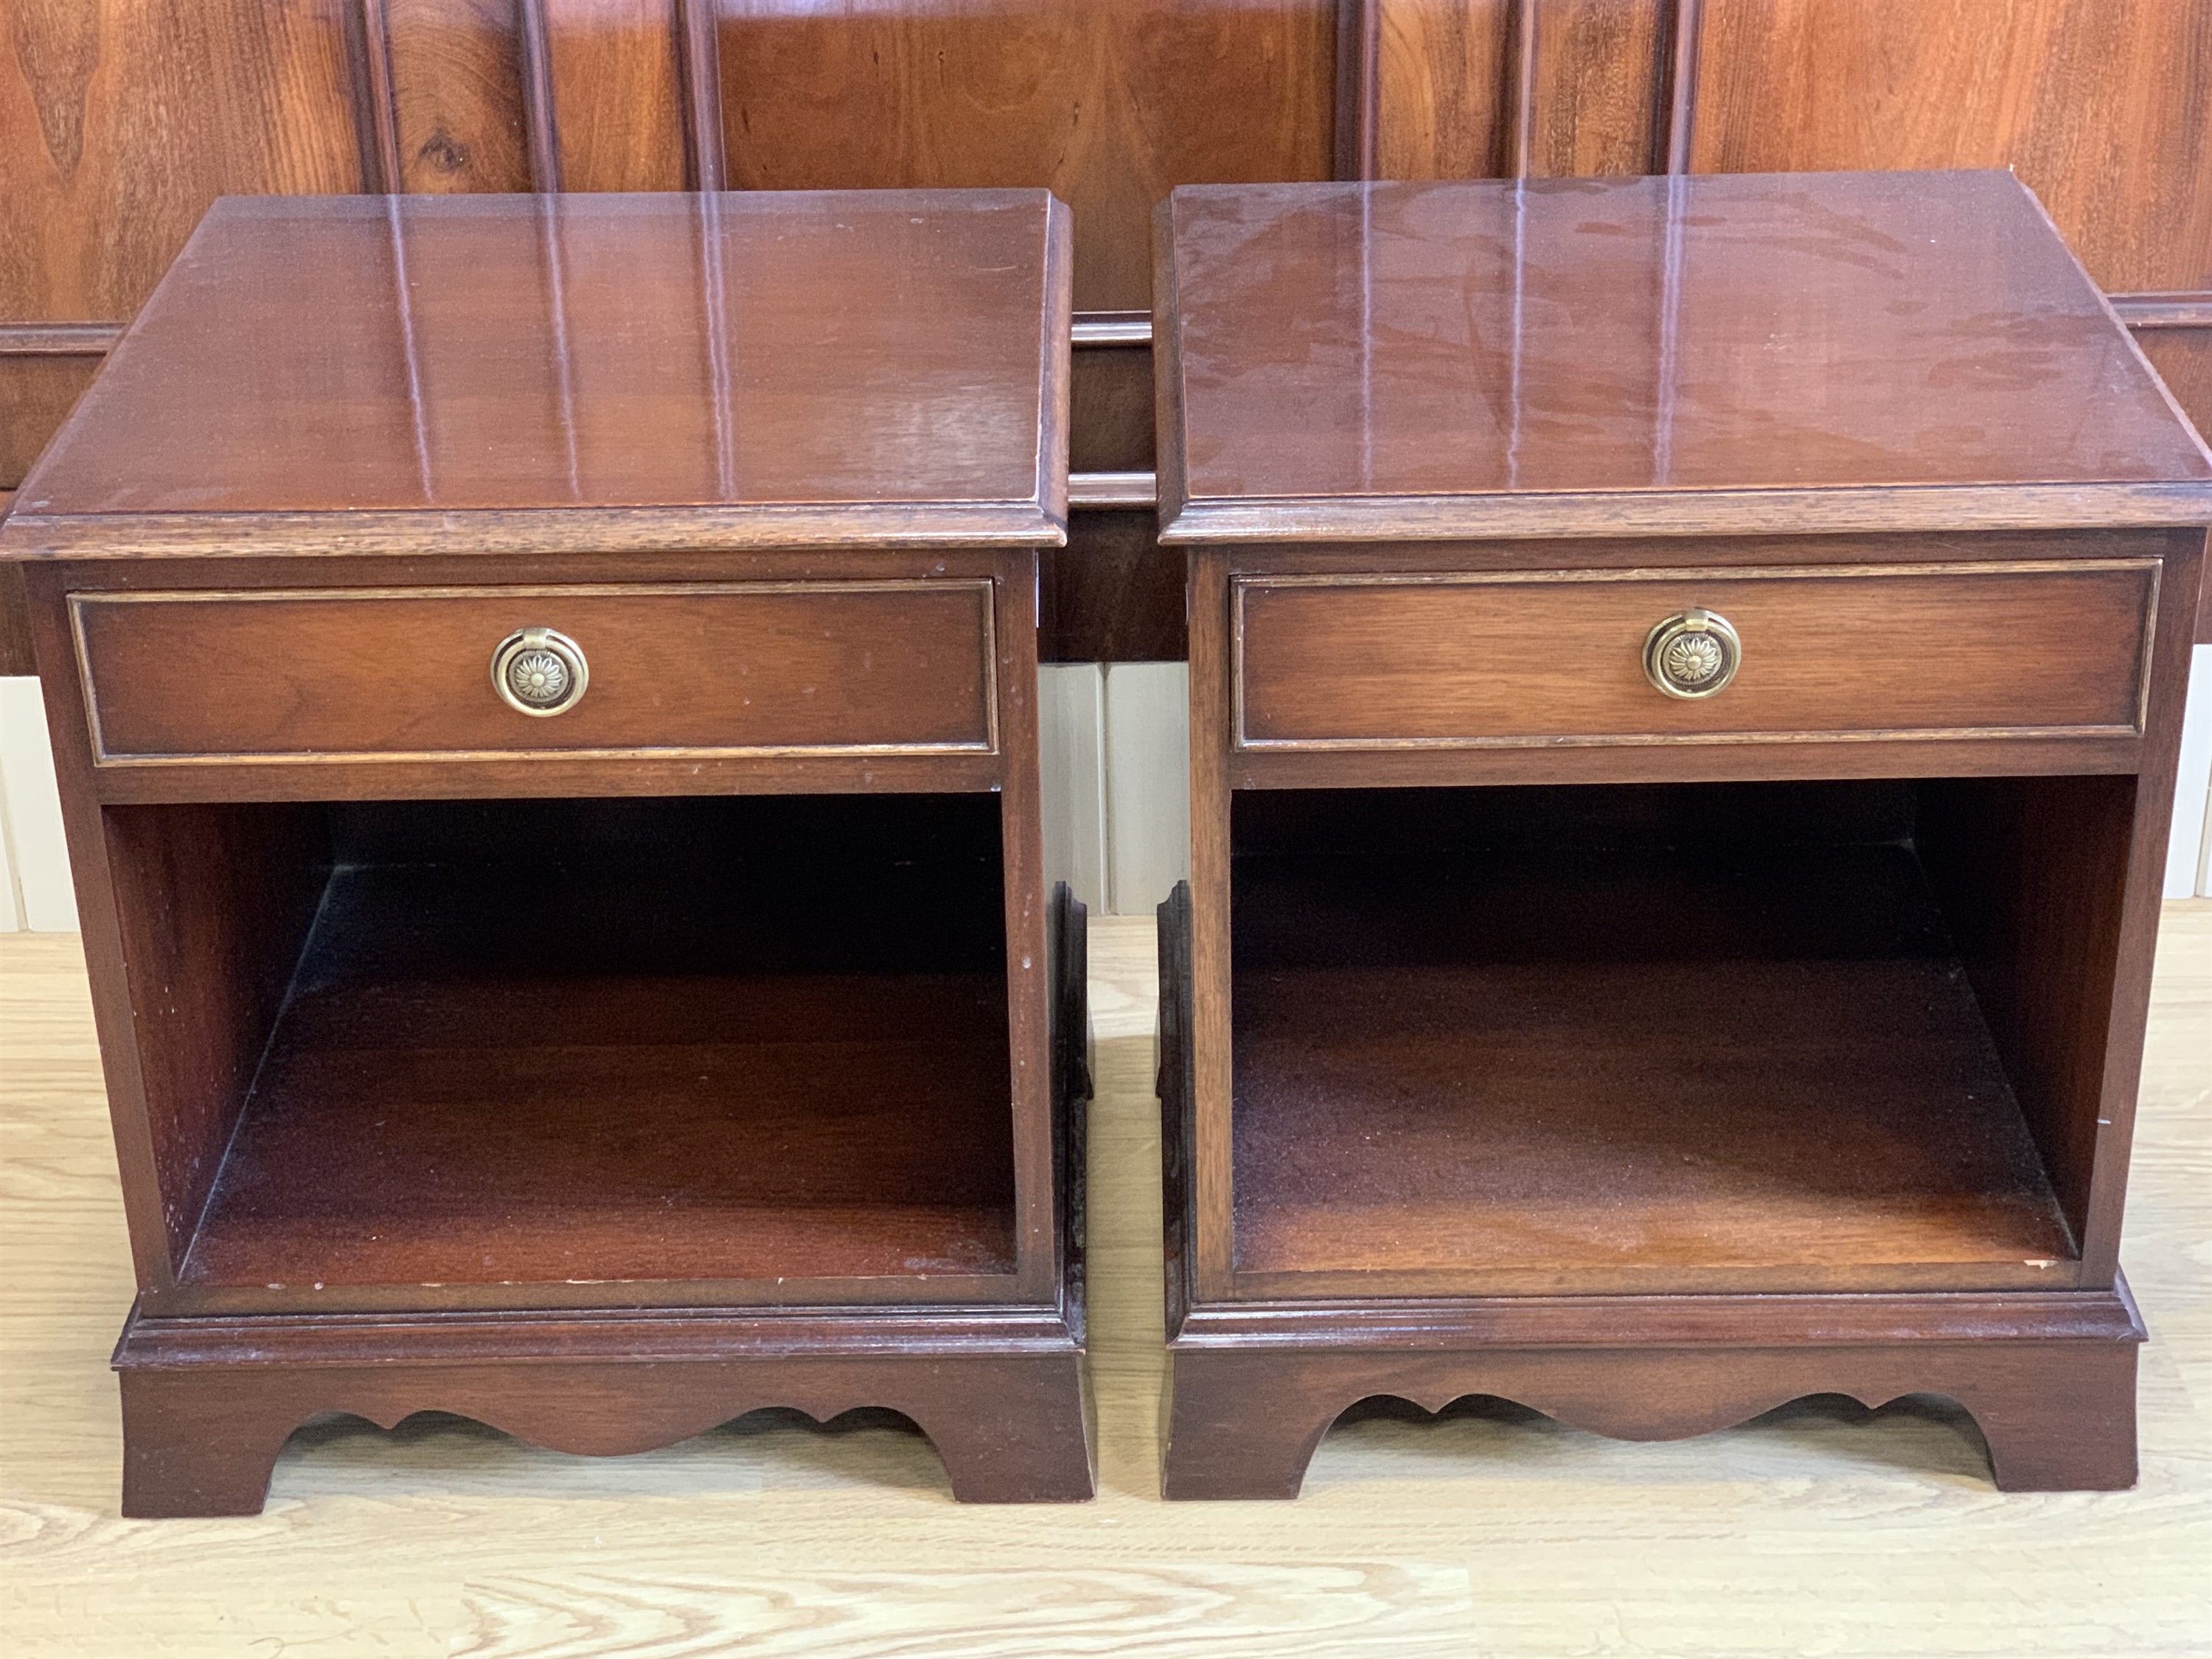 A pair of Reprodux Georgian-influenced mahogany bed side cabinets, 49 cm x 46 cm x 56 cm